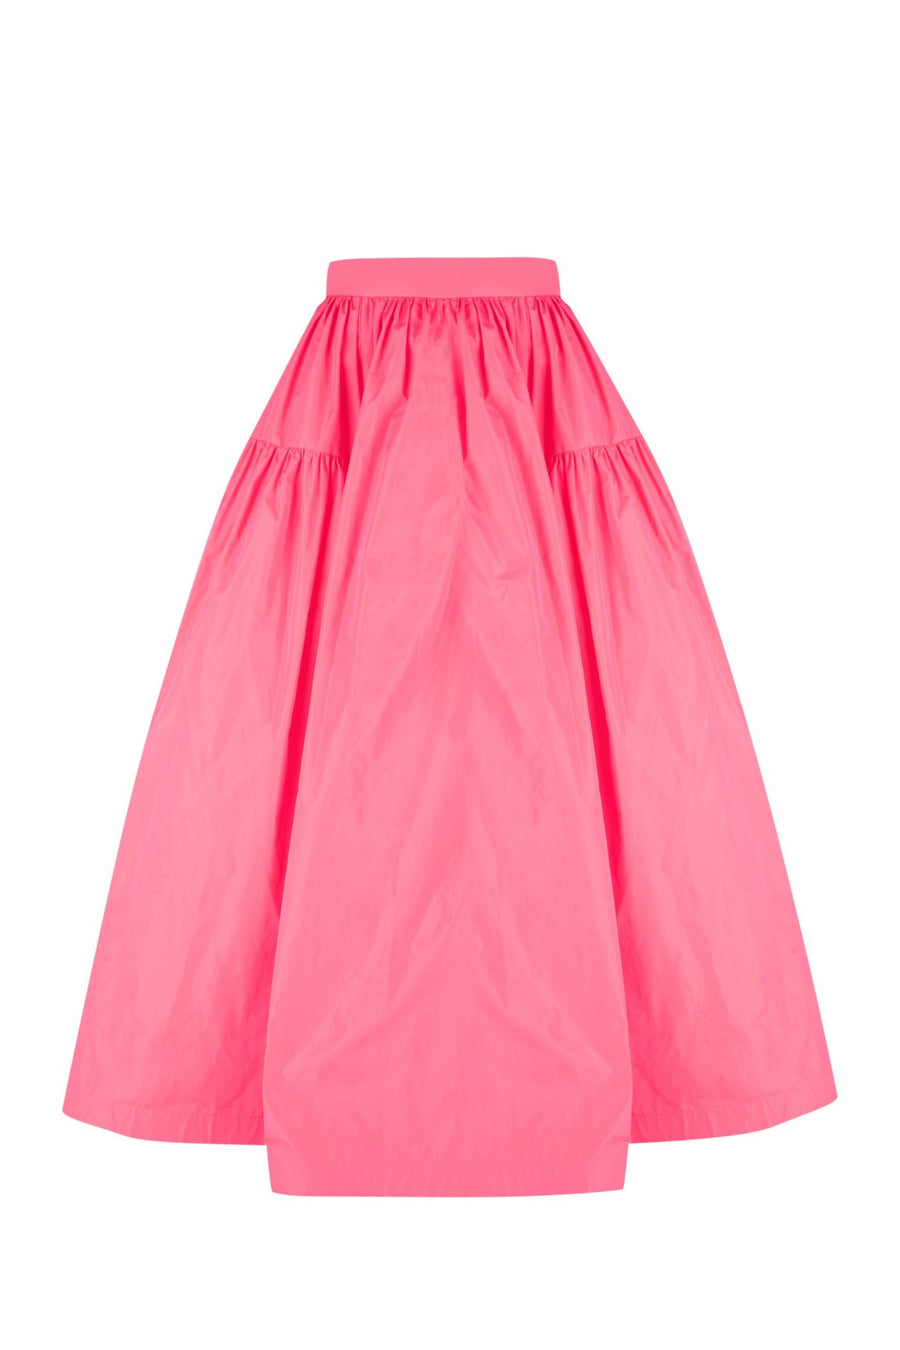 THE 2ND SKIN TAFFETA MIDI SKIRT.  Available in two colour options - pink and magnolia